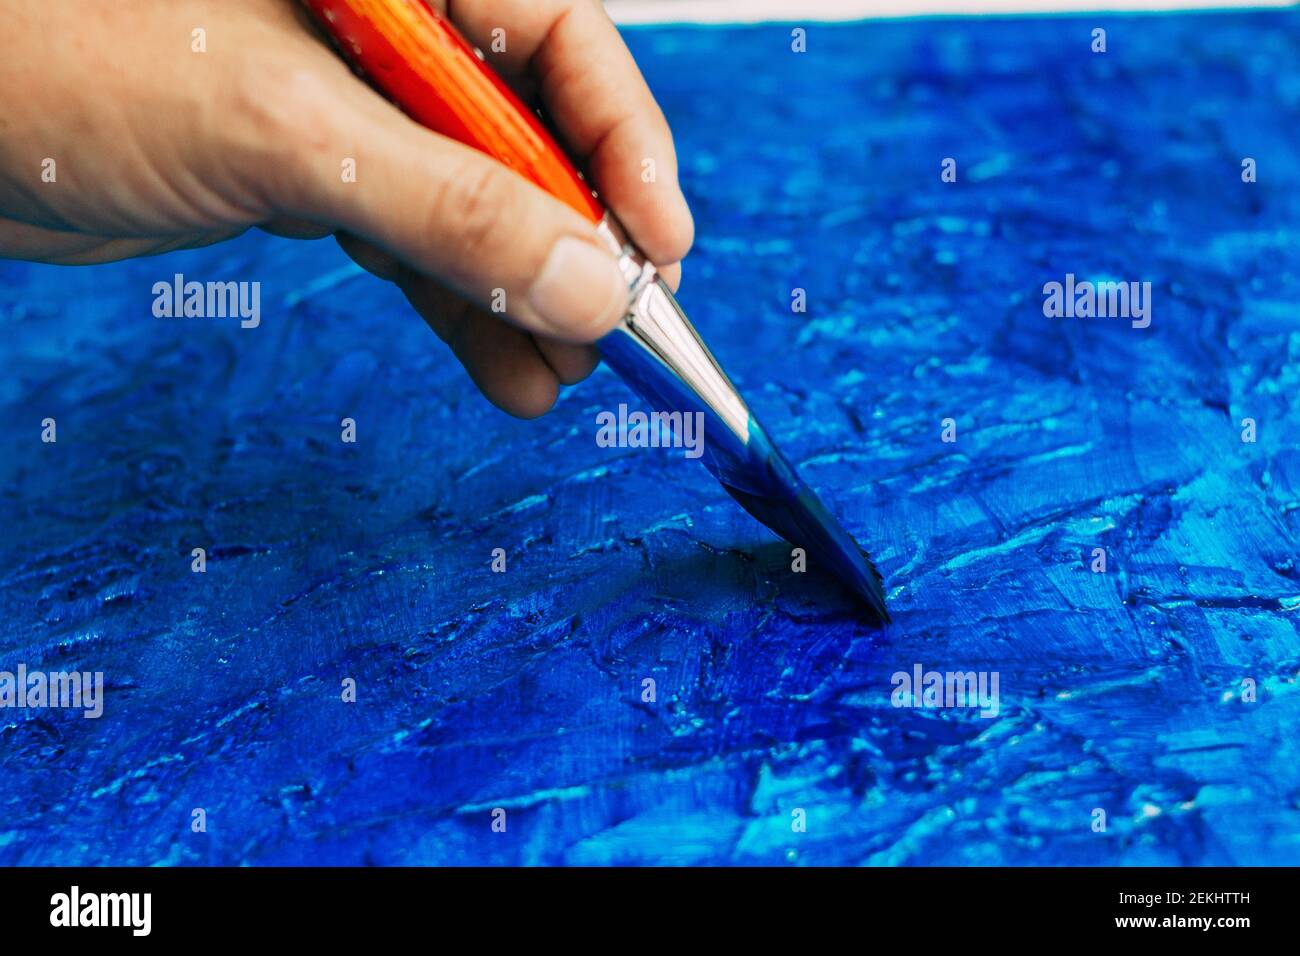 Selective focus of a hand with an artist brush painting a textured blue picture Stock Photo